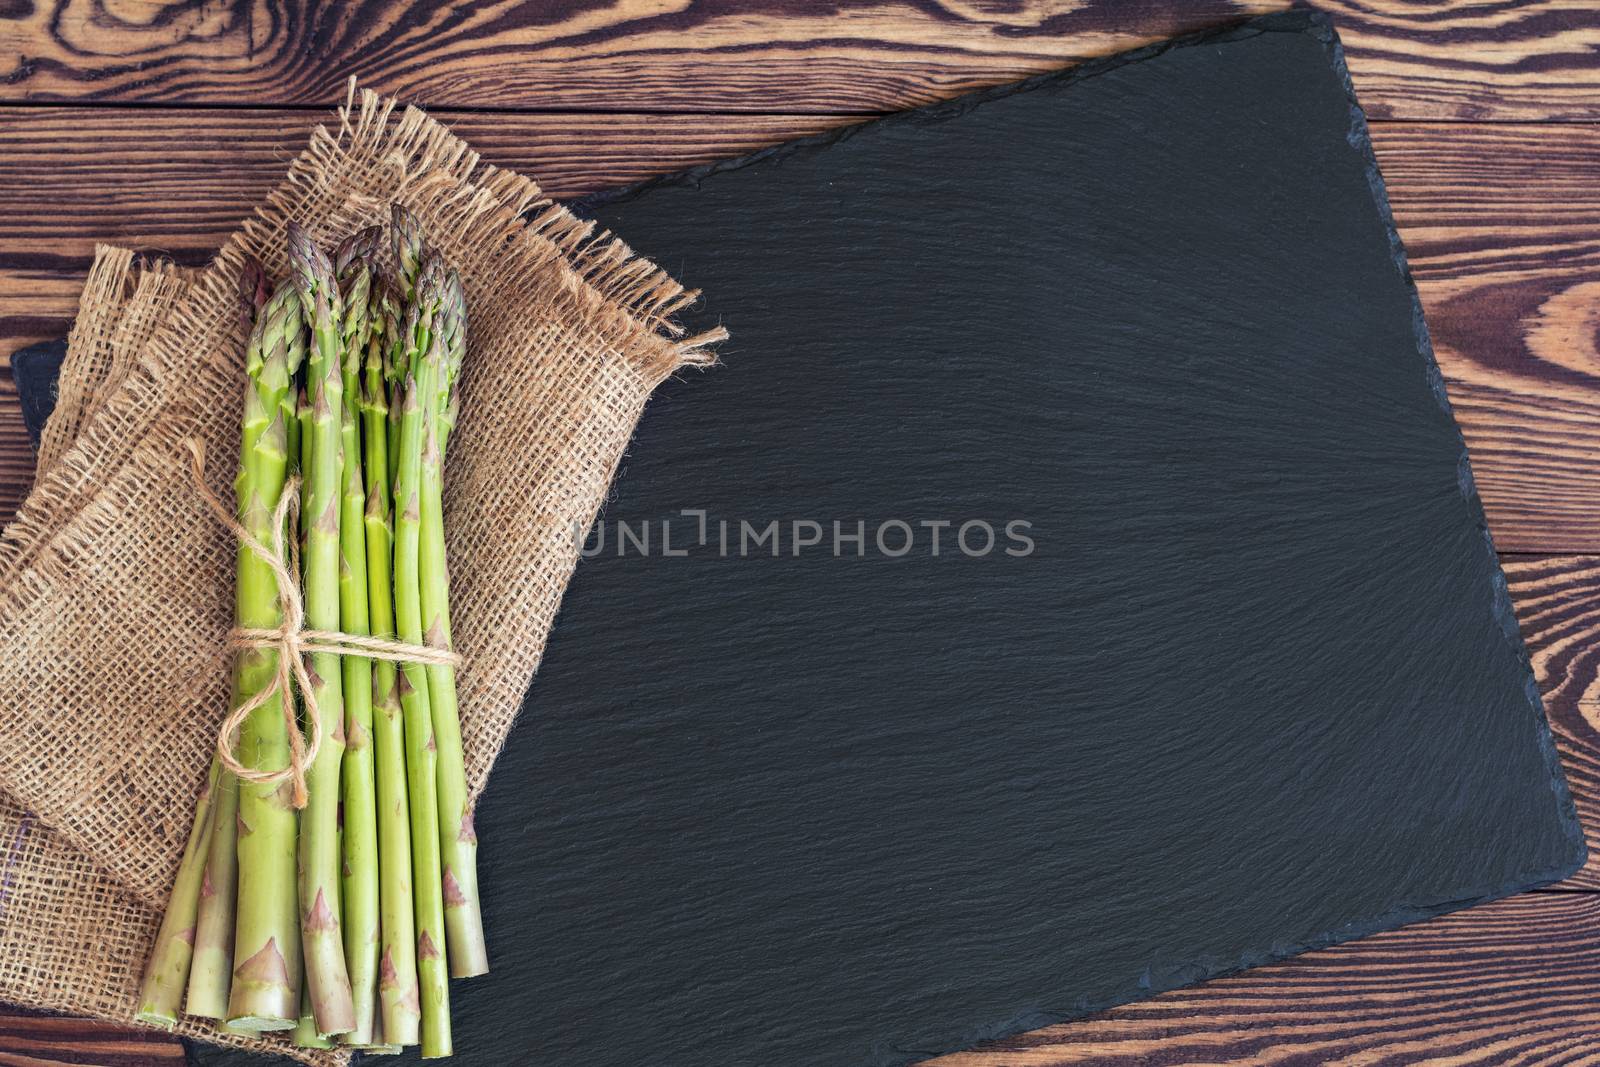 Bunch of fresh green asparagus spears on black stone on a rustic wooden table